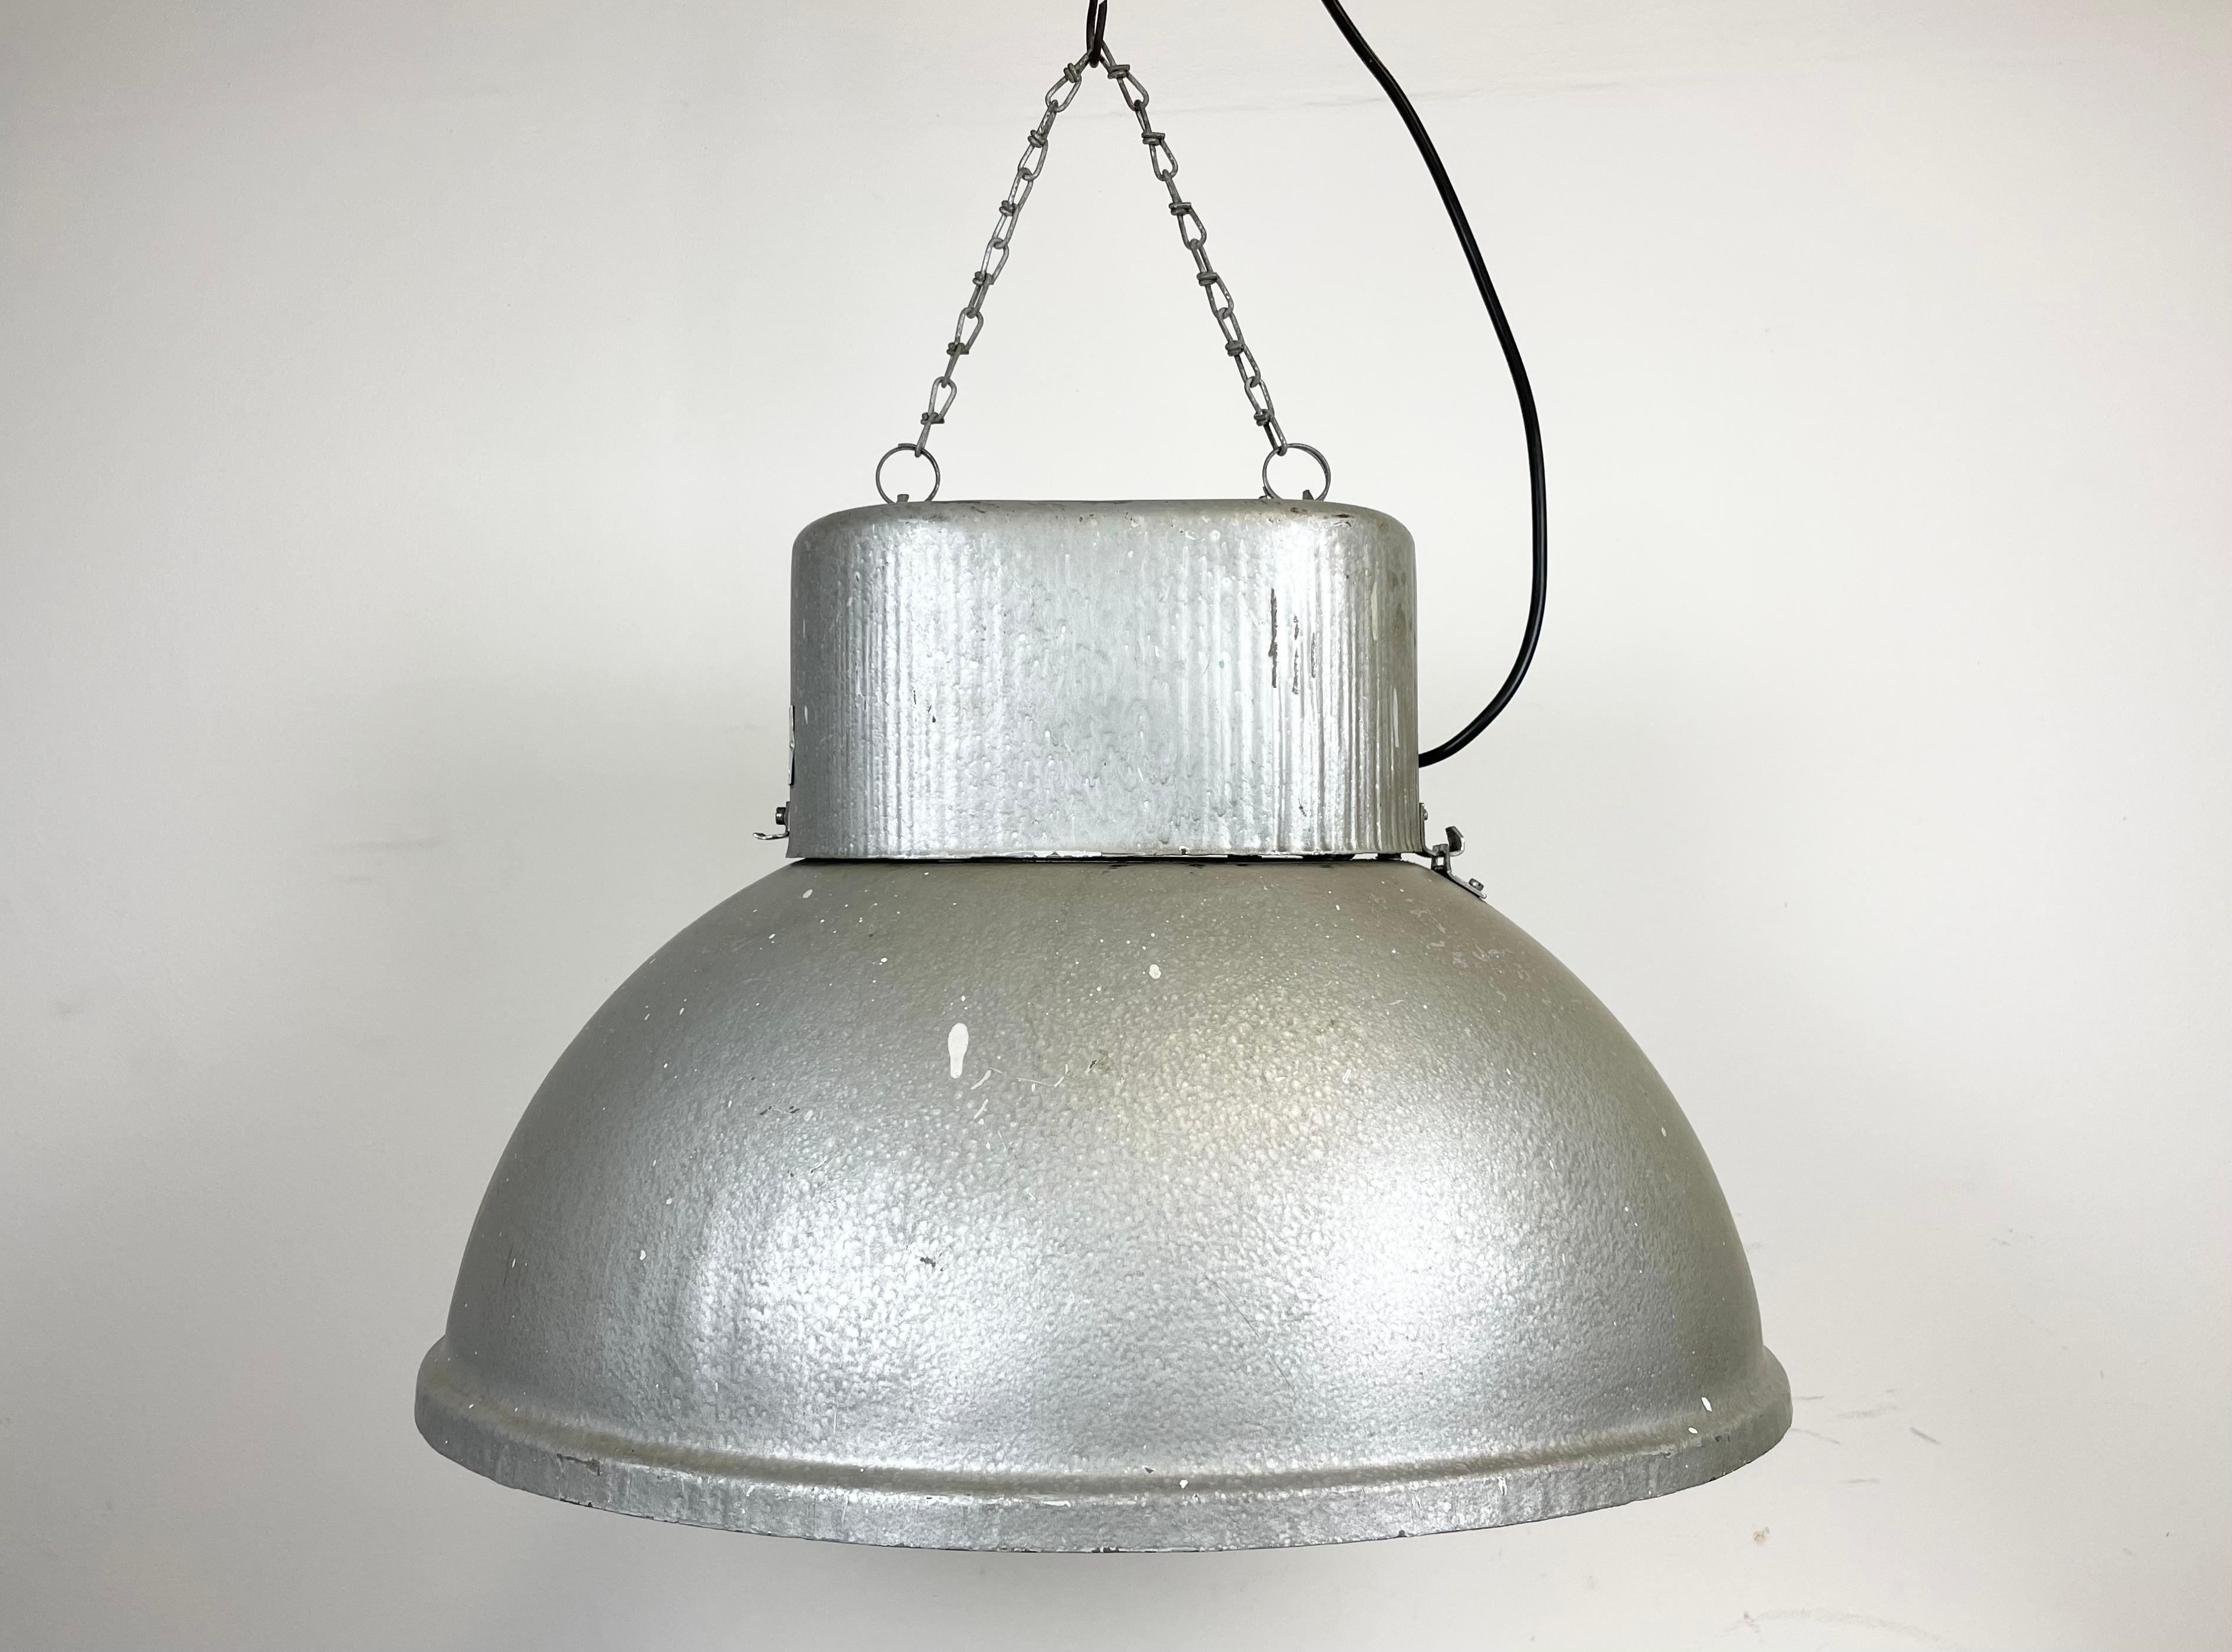 Vintage industrial hanging lamp manufactured in 1970s by Predom Mesko in Skarzysko-Kamienna in Poland. It features a hammerpaint iron body. The original porcelain socket E 40 is equipped with an adapter from E40 to E27 and requires E 27/ E 26 light